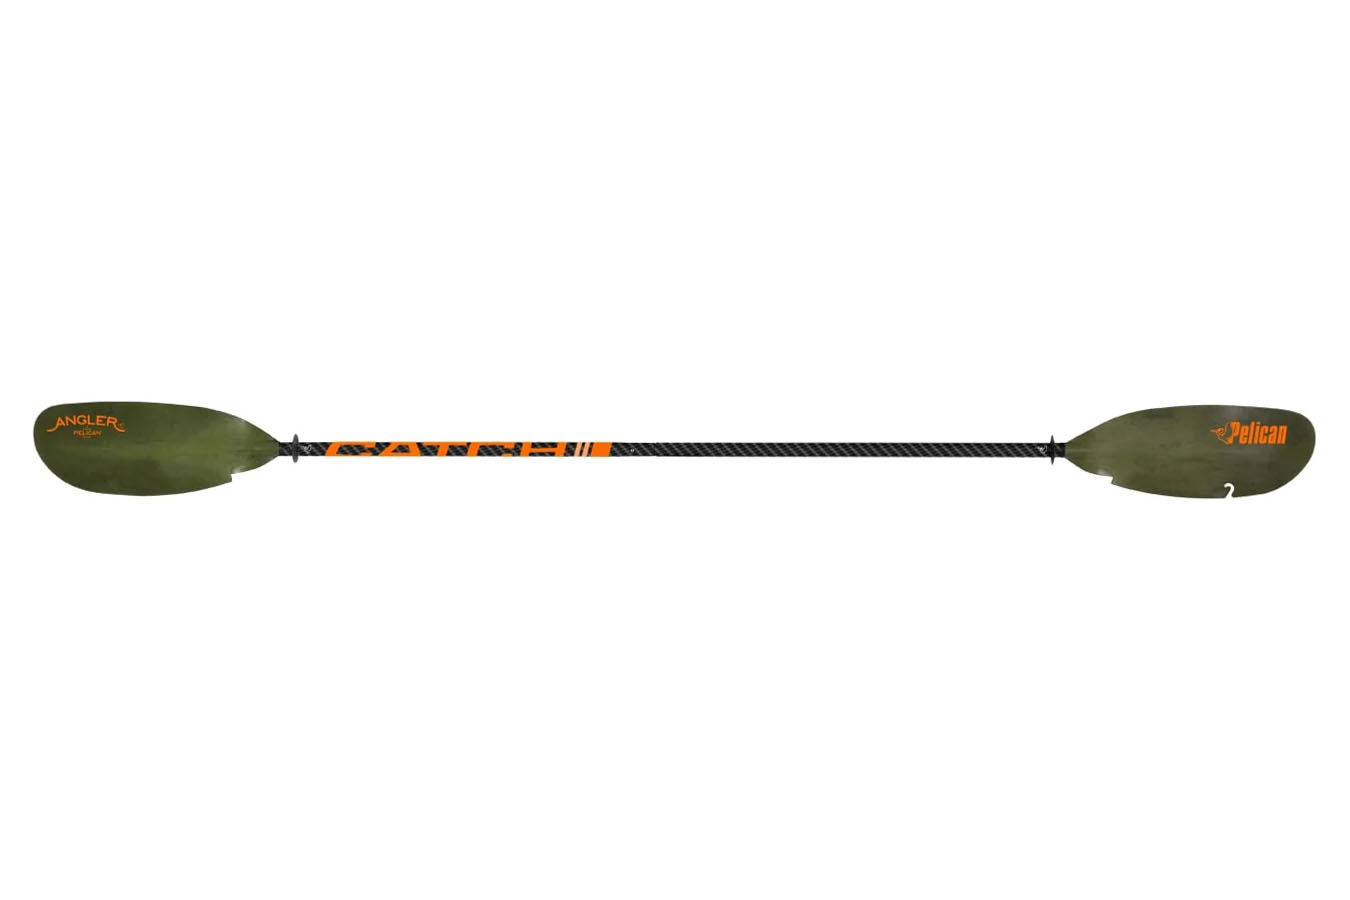 Pelican Boats Catch Fishing Kayak Paddle in Olive Camo for Sale